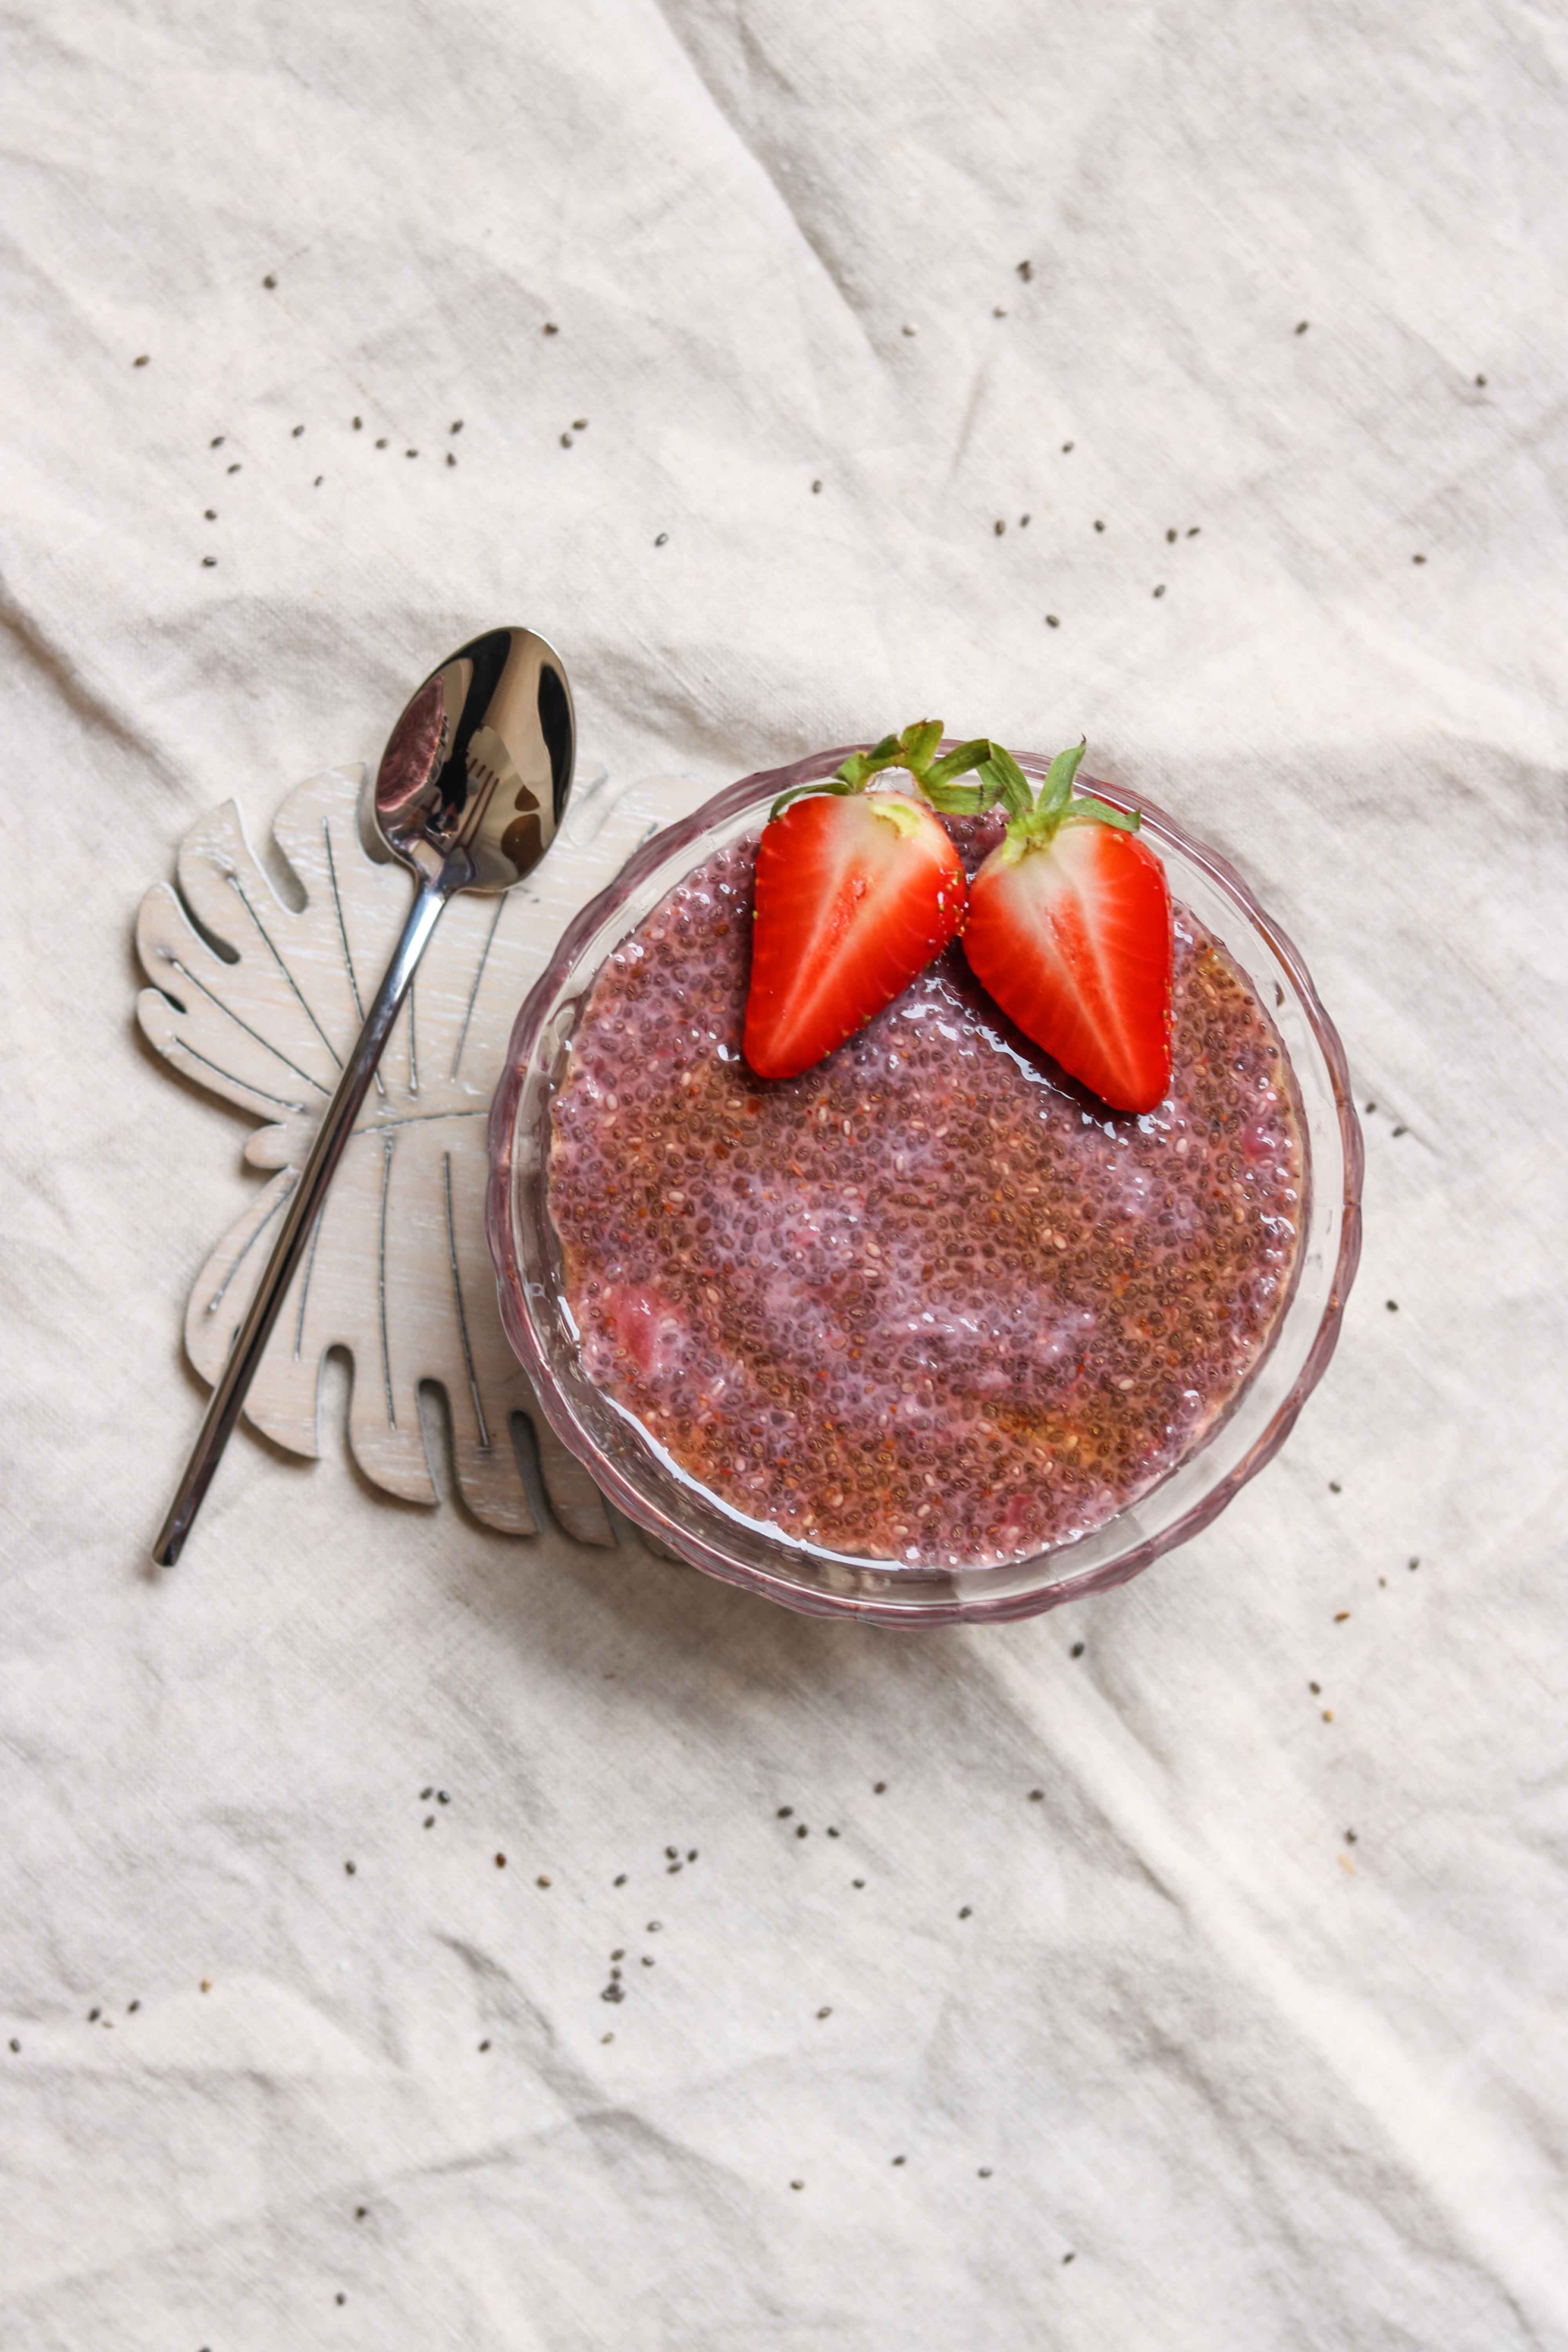 Strawberry chia pudding, a tasty snack that takes minutes to make. Make in advance for a super easy pudding.